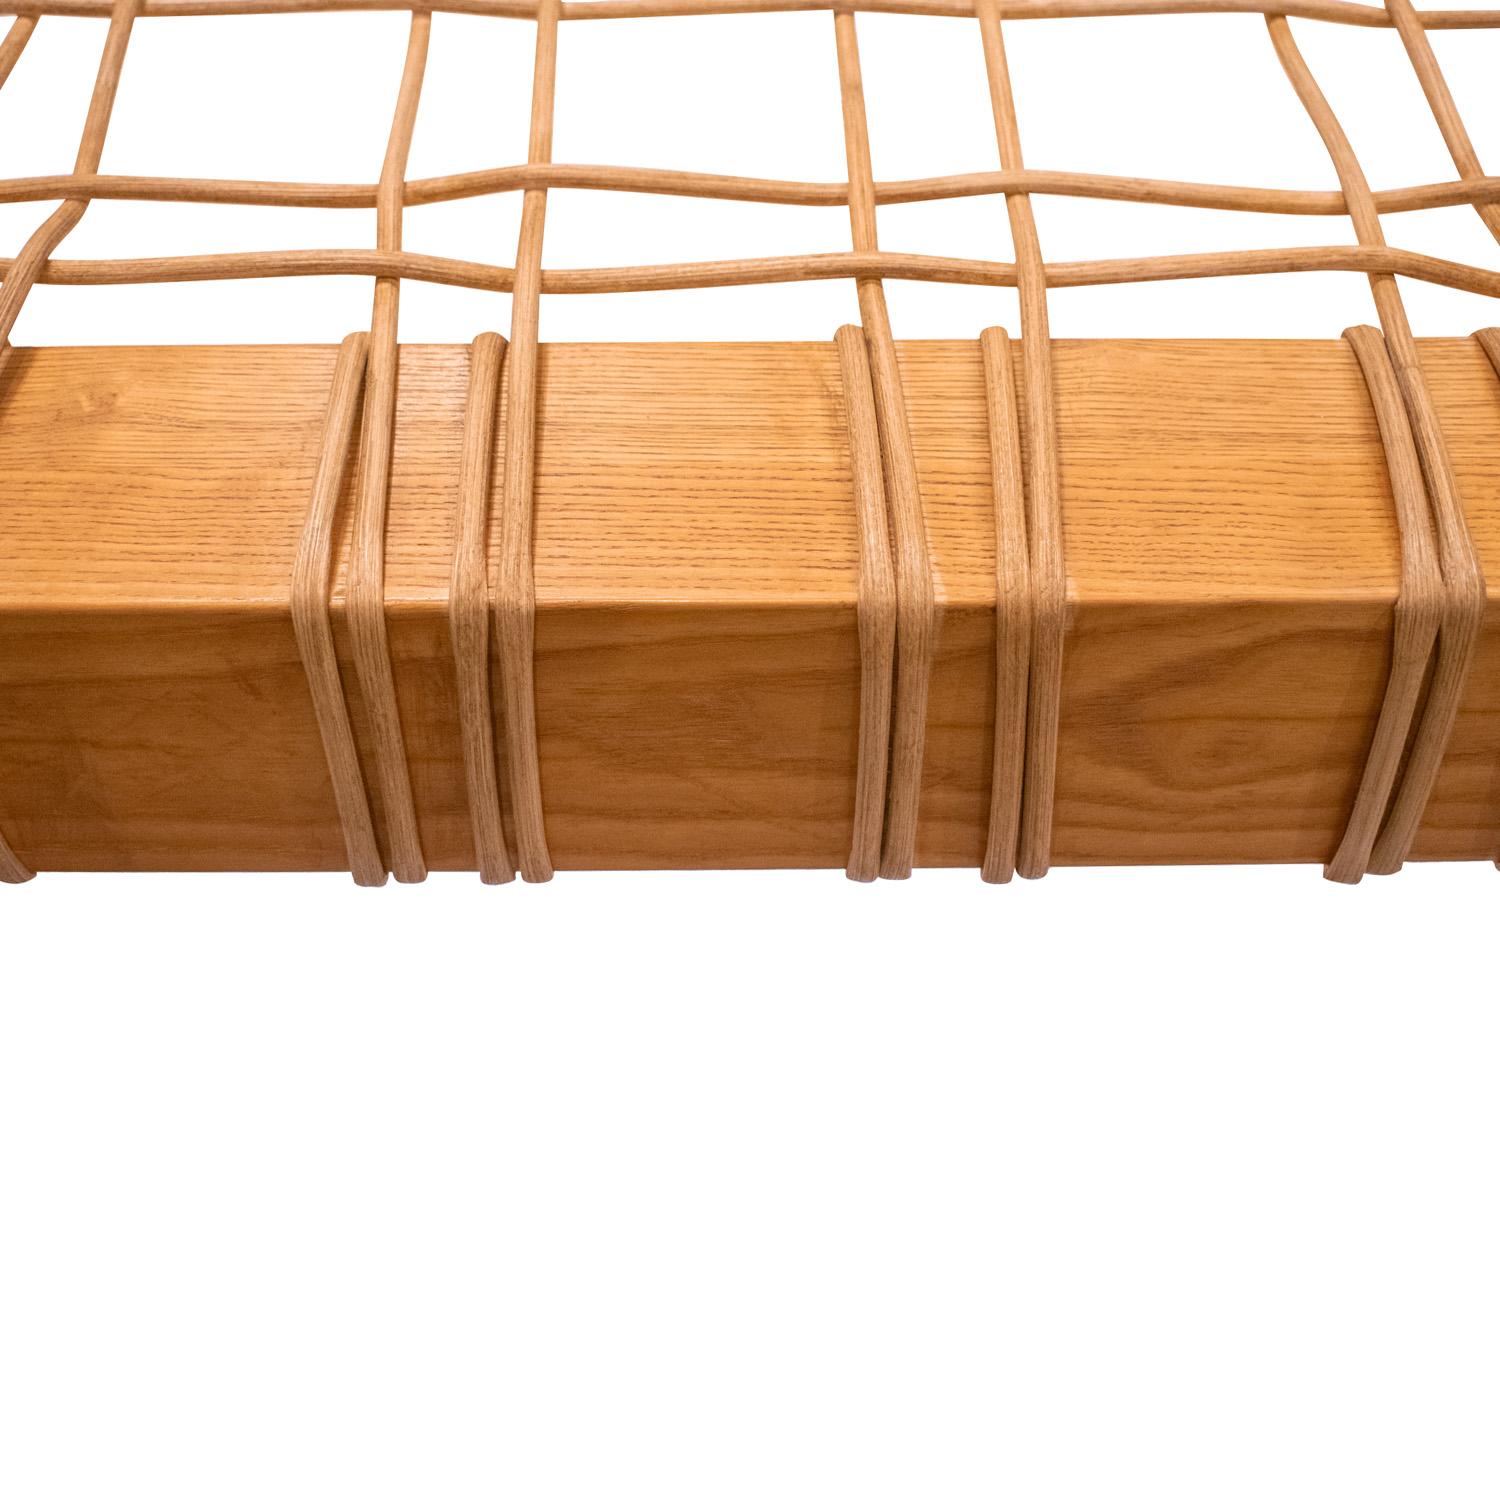 Karl Springer Rare and Impressive Coffee Table with Woven Rattan 1980s In Excellent Condition For Sale In New York, NY